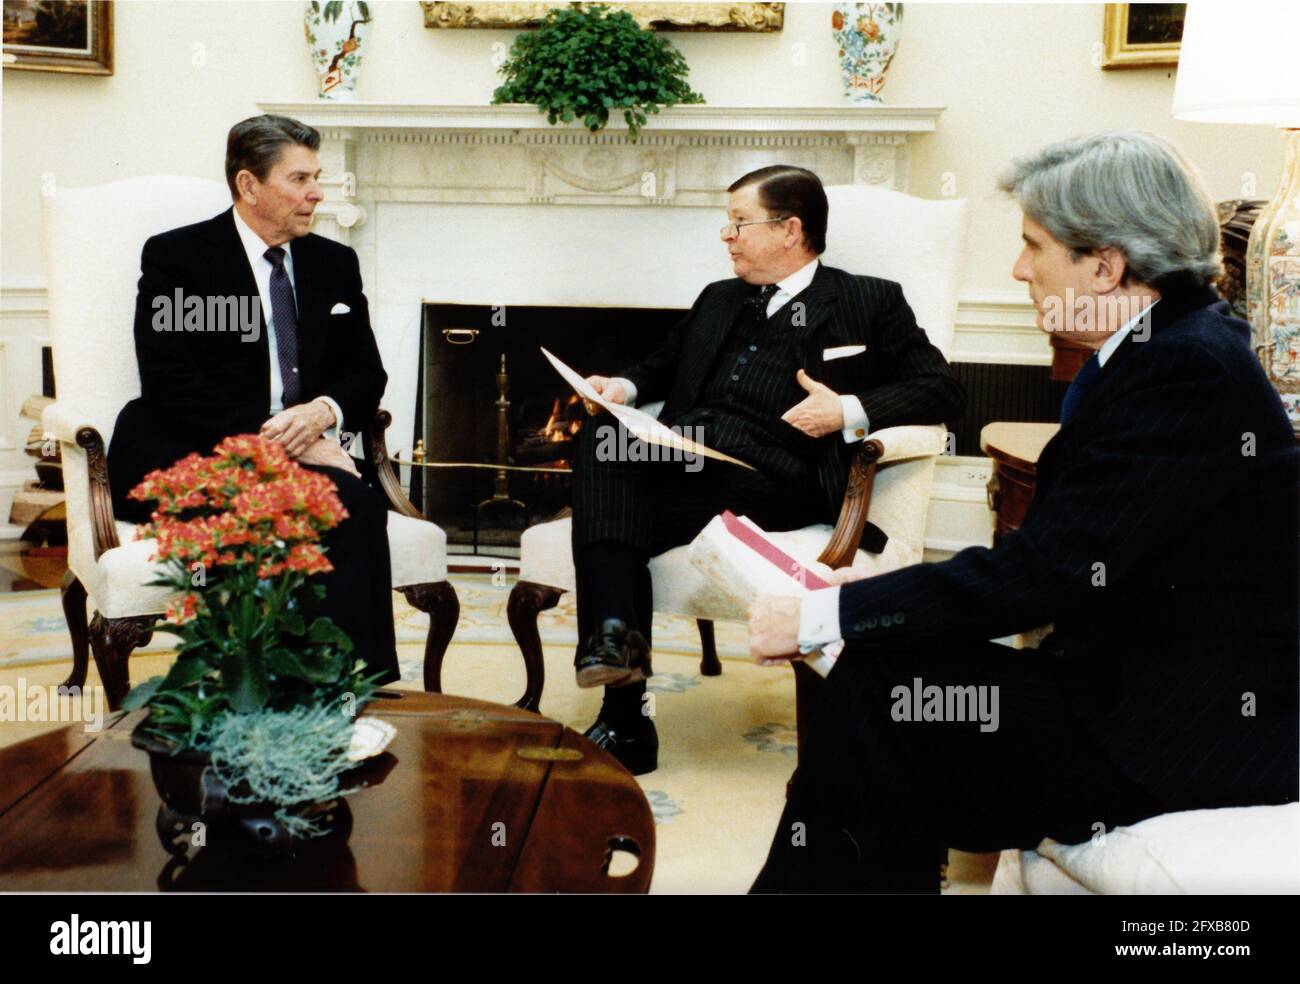 United States President Ronald Reagan, left, meets with U.S. Senators John Tower (Republican of Texas), center, and John Warner (Republican of Virginia), right, in the Oval Office of the White House in Washington, D.C. on Tuesday, January 10, 1984..Mandatory Credit: Pete Souza - White House via CNP /MediaPunch Stock Photo